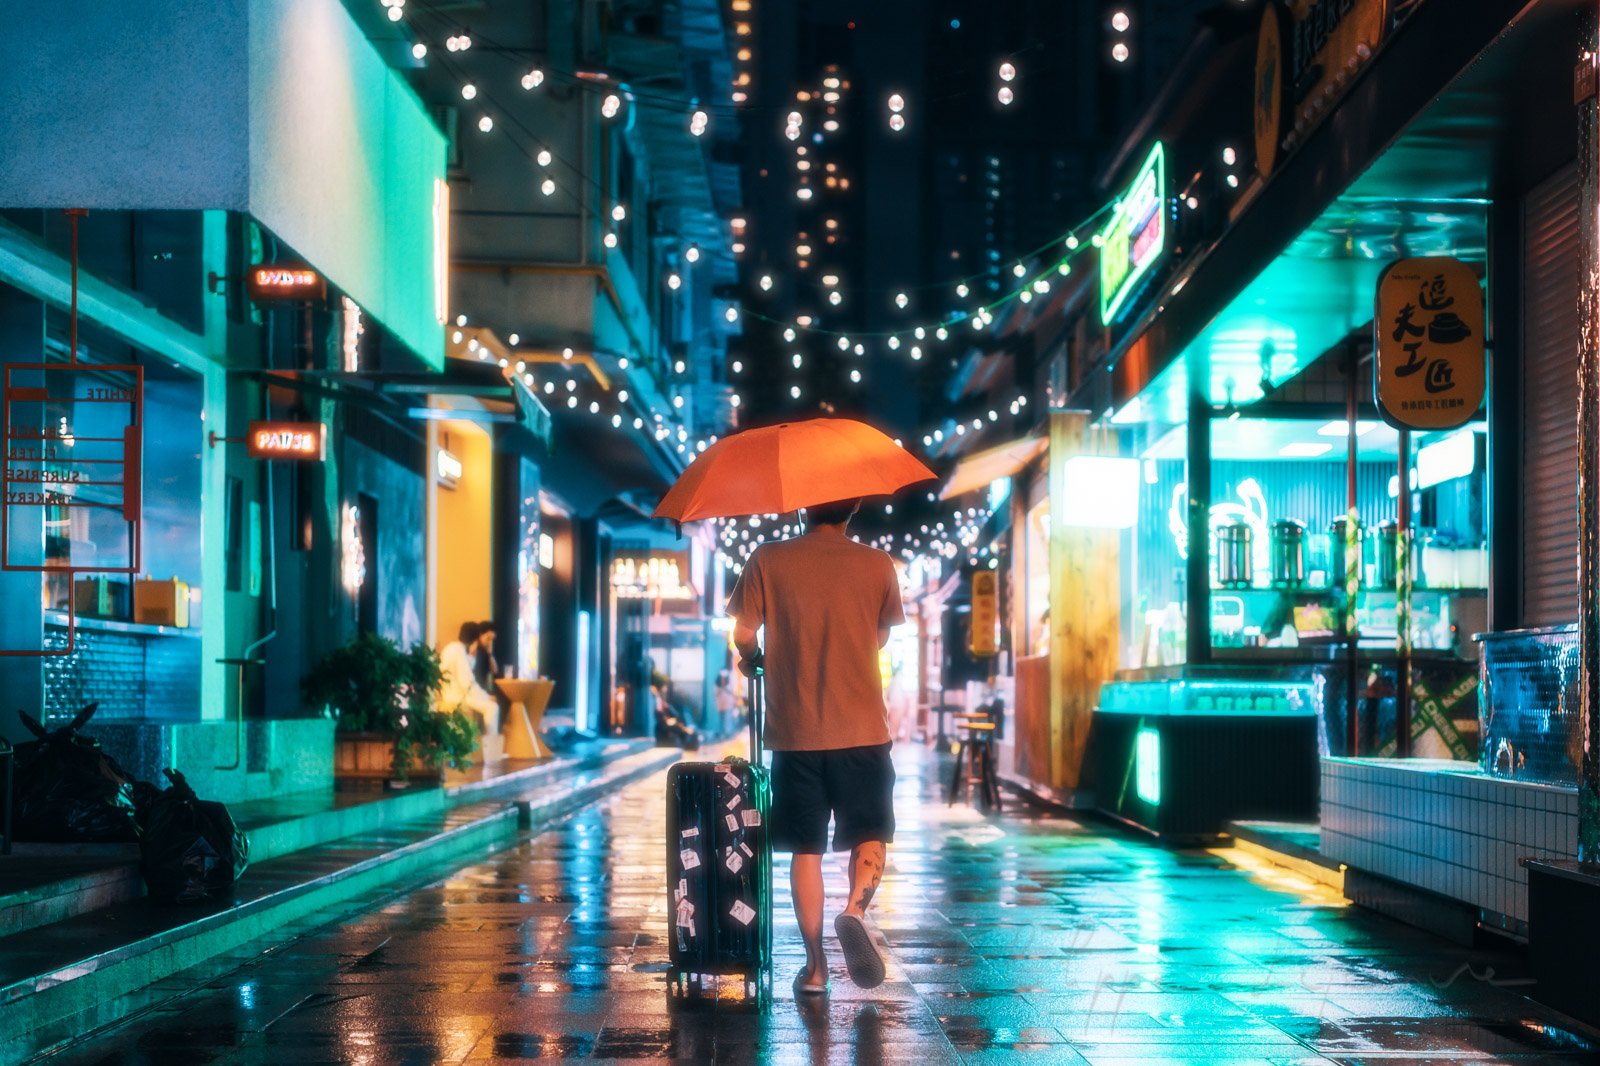 Young traveller with luggage in an illuminated street at nighty under the rain, Chengdu, Sichuan province, China